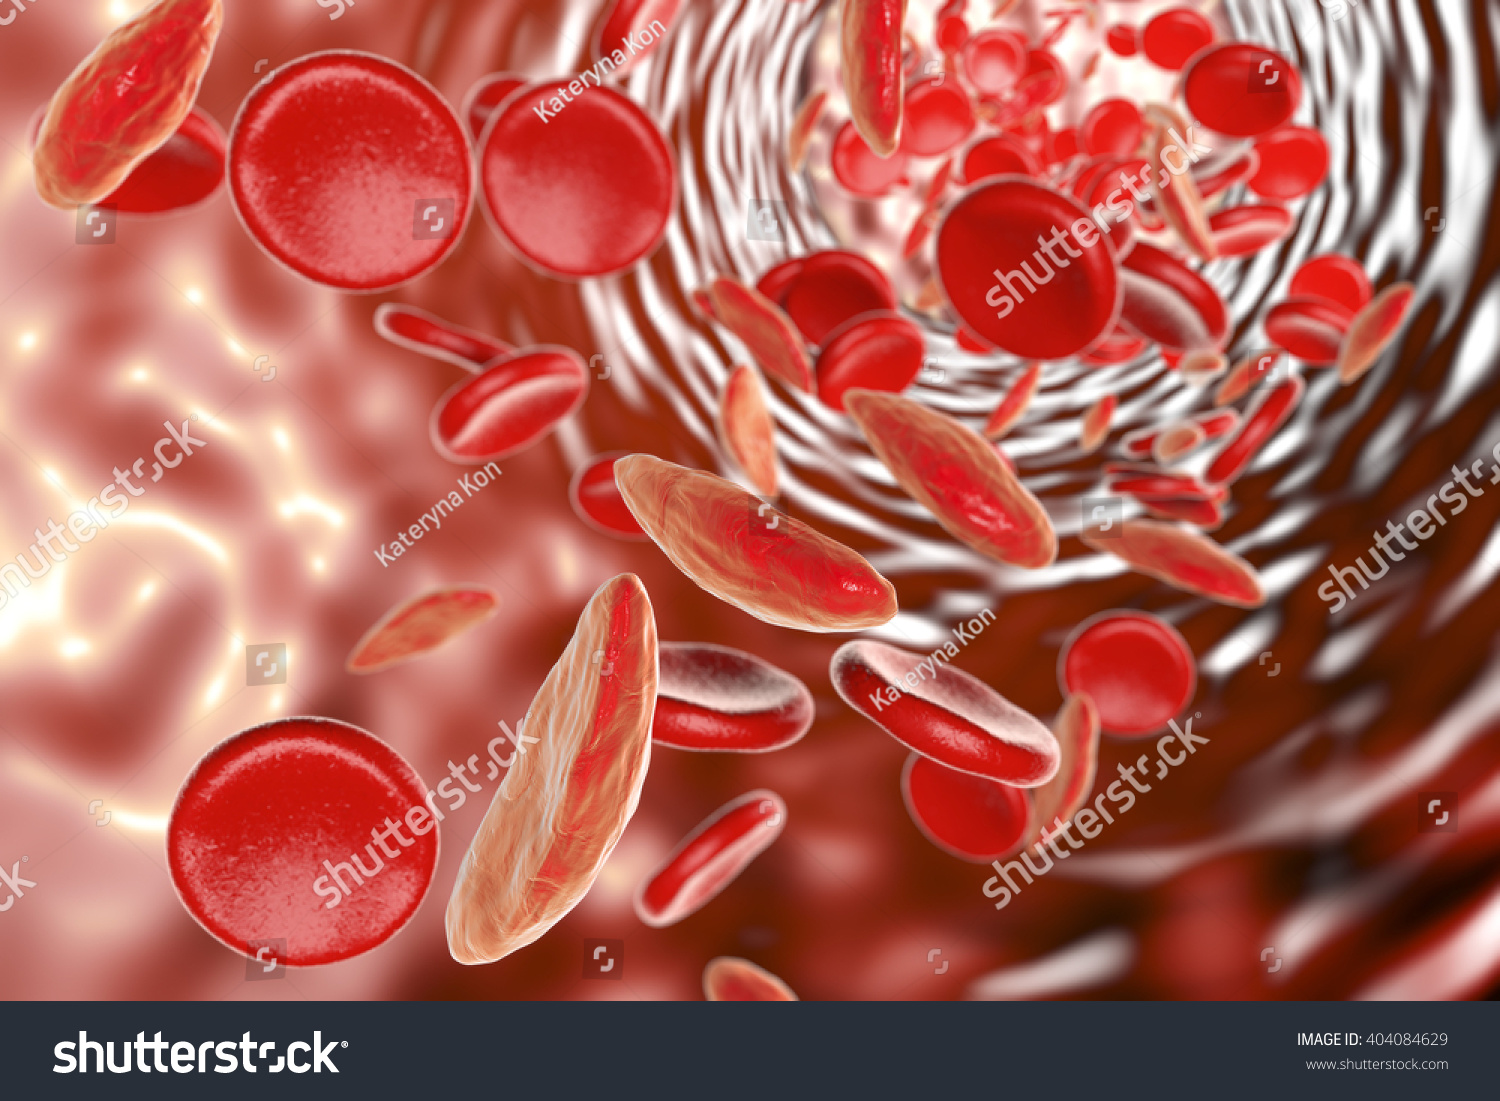 Sickle Cell Anemia 3d Illustration Showing Stock Illustration 404084629 Shutterstock 4161